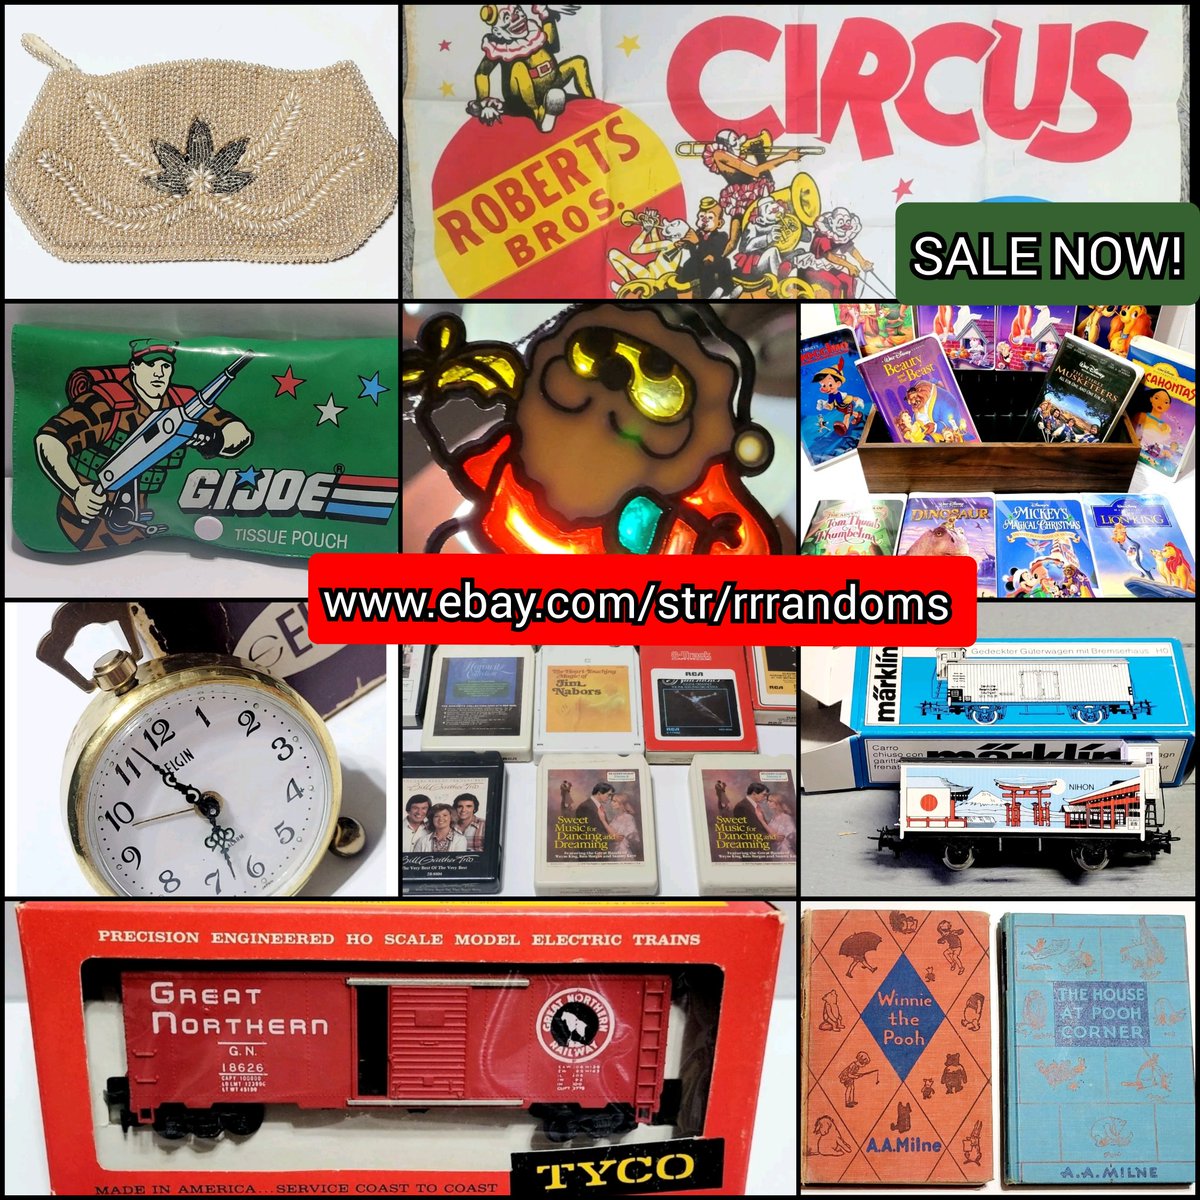 Sale going on now #holidayshopping #christmas #vintage #antique #collectibles #modeltrains #vintagetoys #christmasornaments #jewelry #militaria #trains #holiday #blackfriday #shopping #gifts #circus #books #smallbusiness #womanownedbusiness #ebay ebay.com/str/rrrandoms